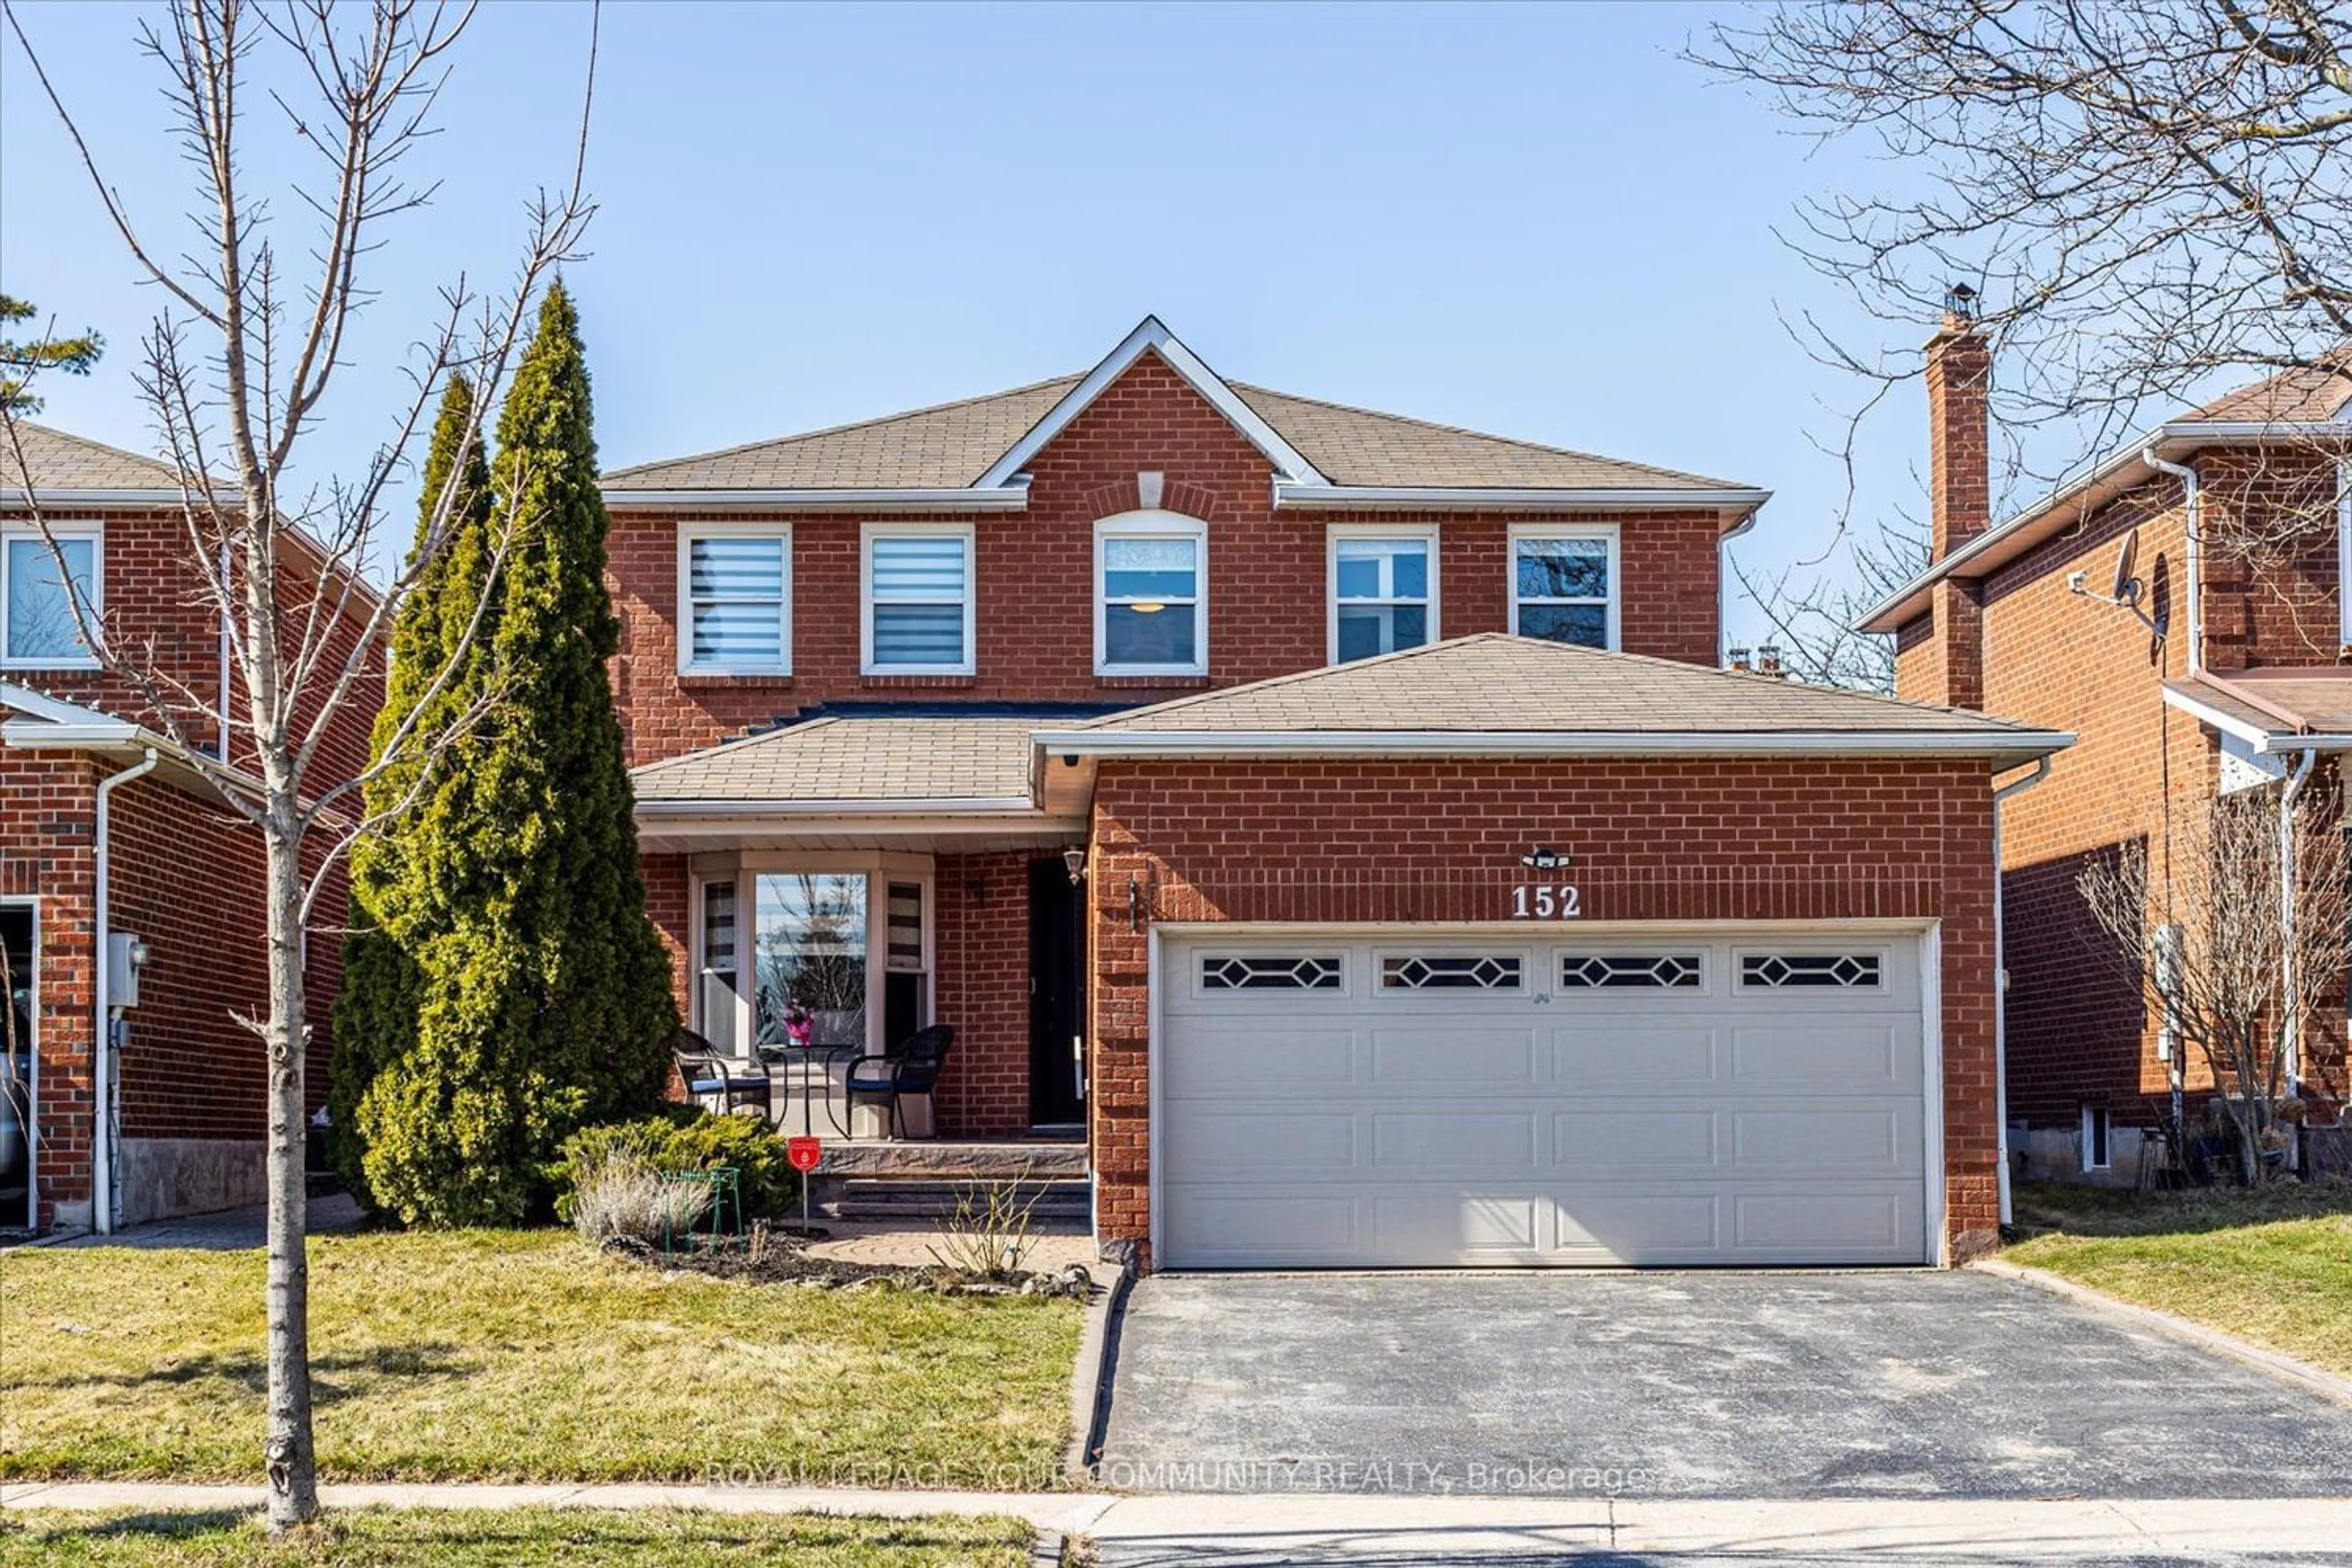 Home with brick exterior material for 152 Greenock Dr, Vaughan Ontario L6A 1T4